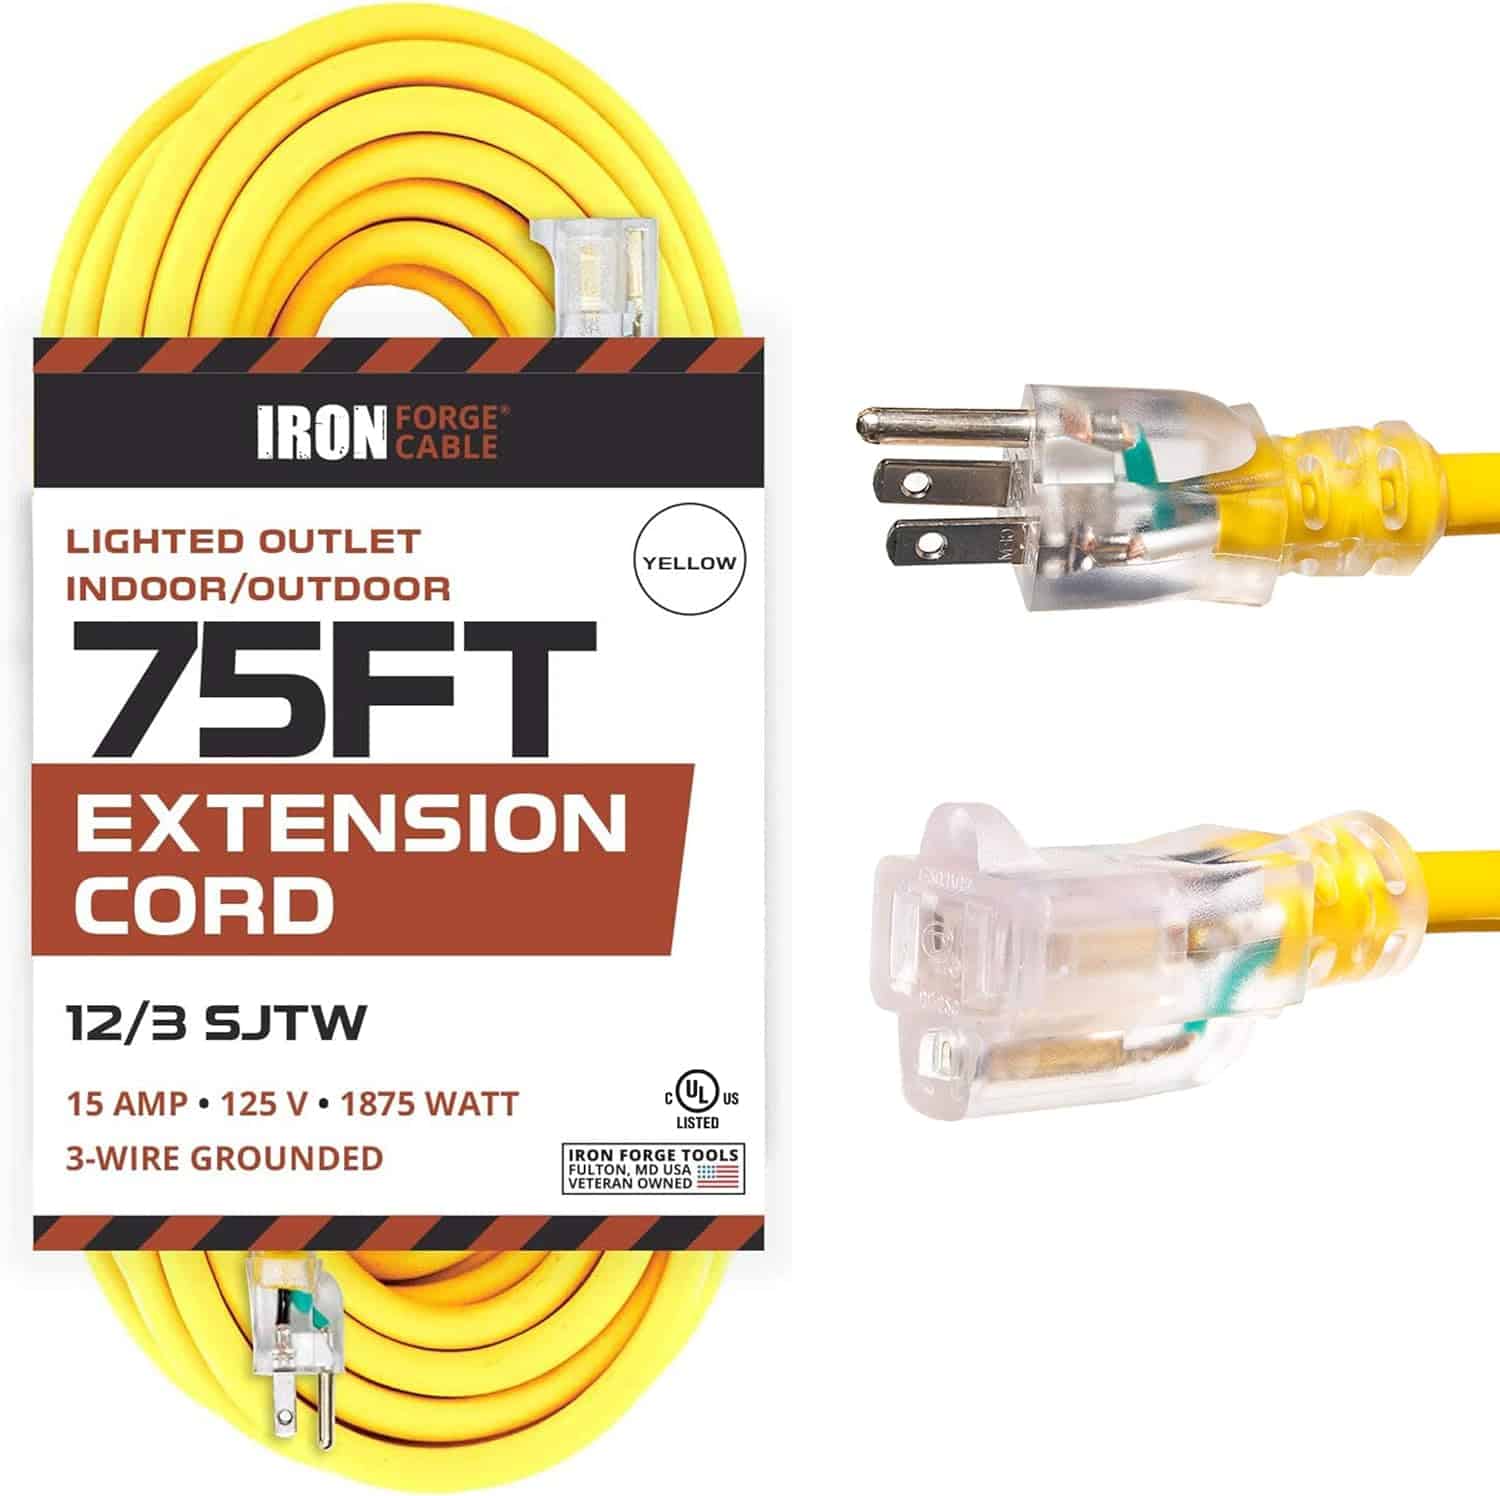 IRON FORGE Outdoor Lighted Extension Cord 75 Ft – 12 3 SJTW Heavy Duty 15 AMP Yellow Extension Cable with 3 Prong Grounded Safety Plug 12 Gauge Extension Cord For Garden Major Electric Appliances 1